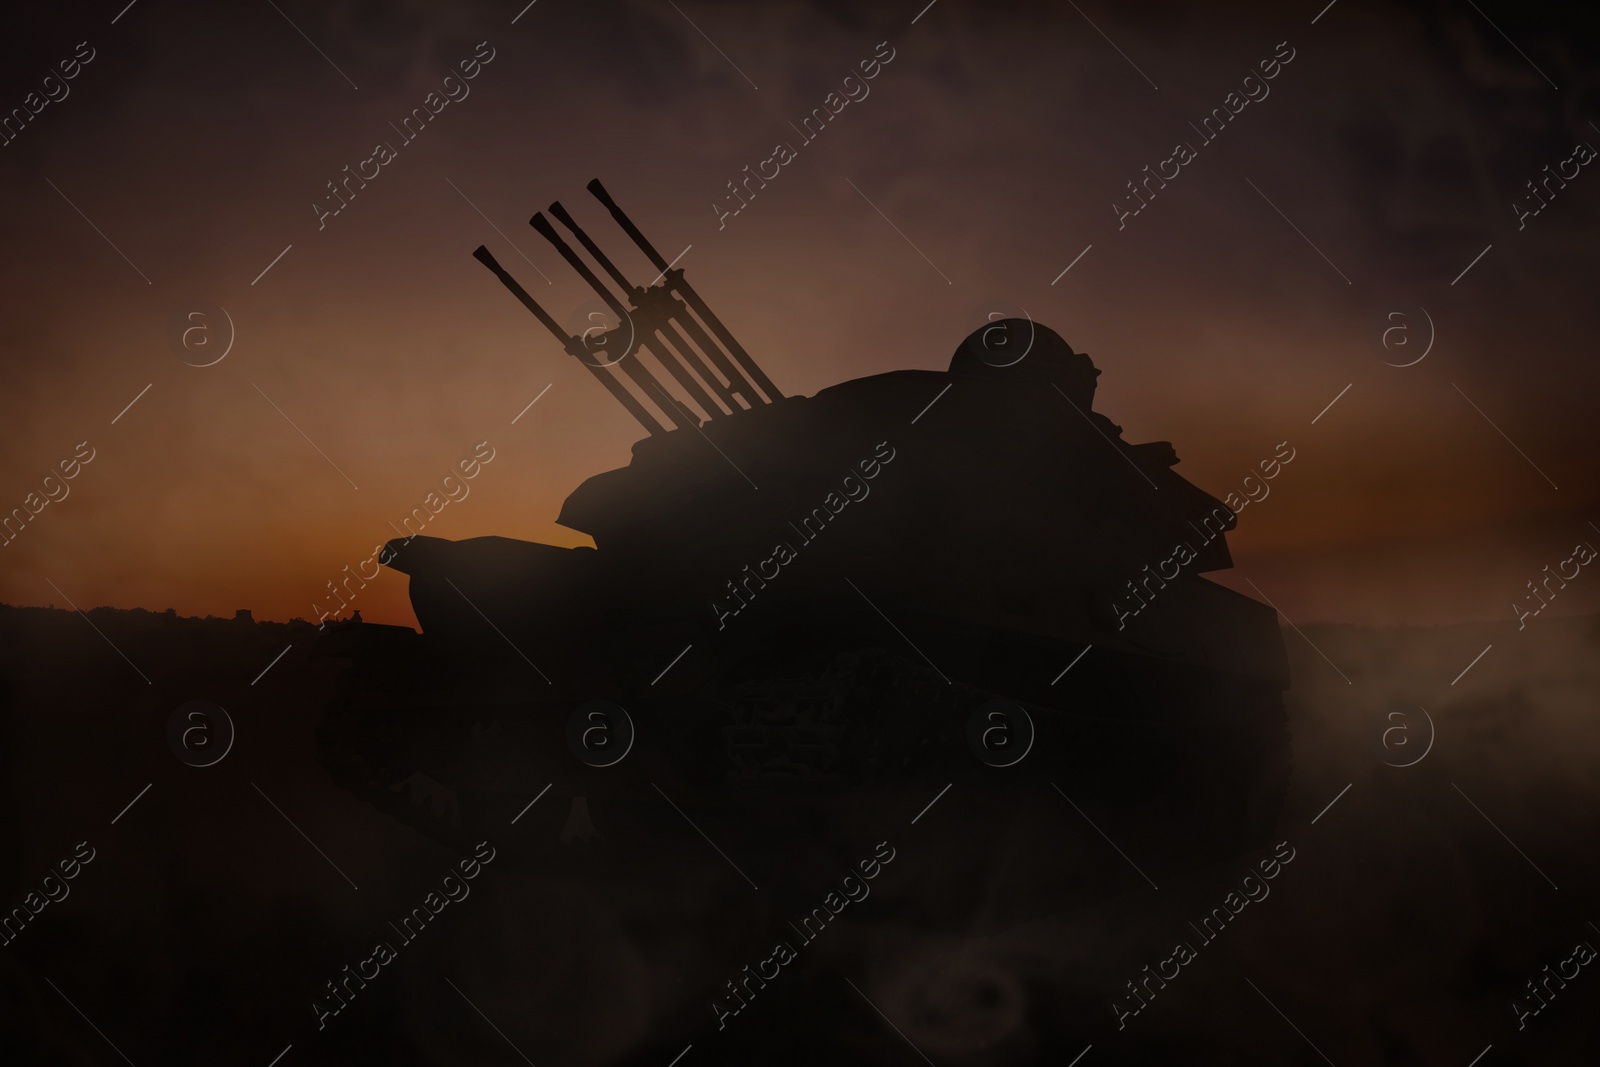 Image of Silhouette of armored fighting vehicle on battlefield in night